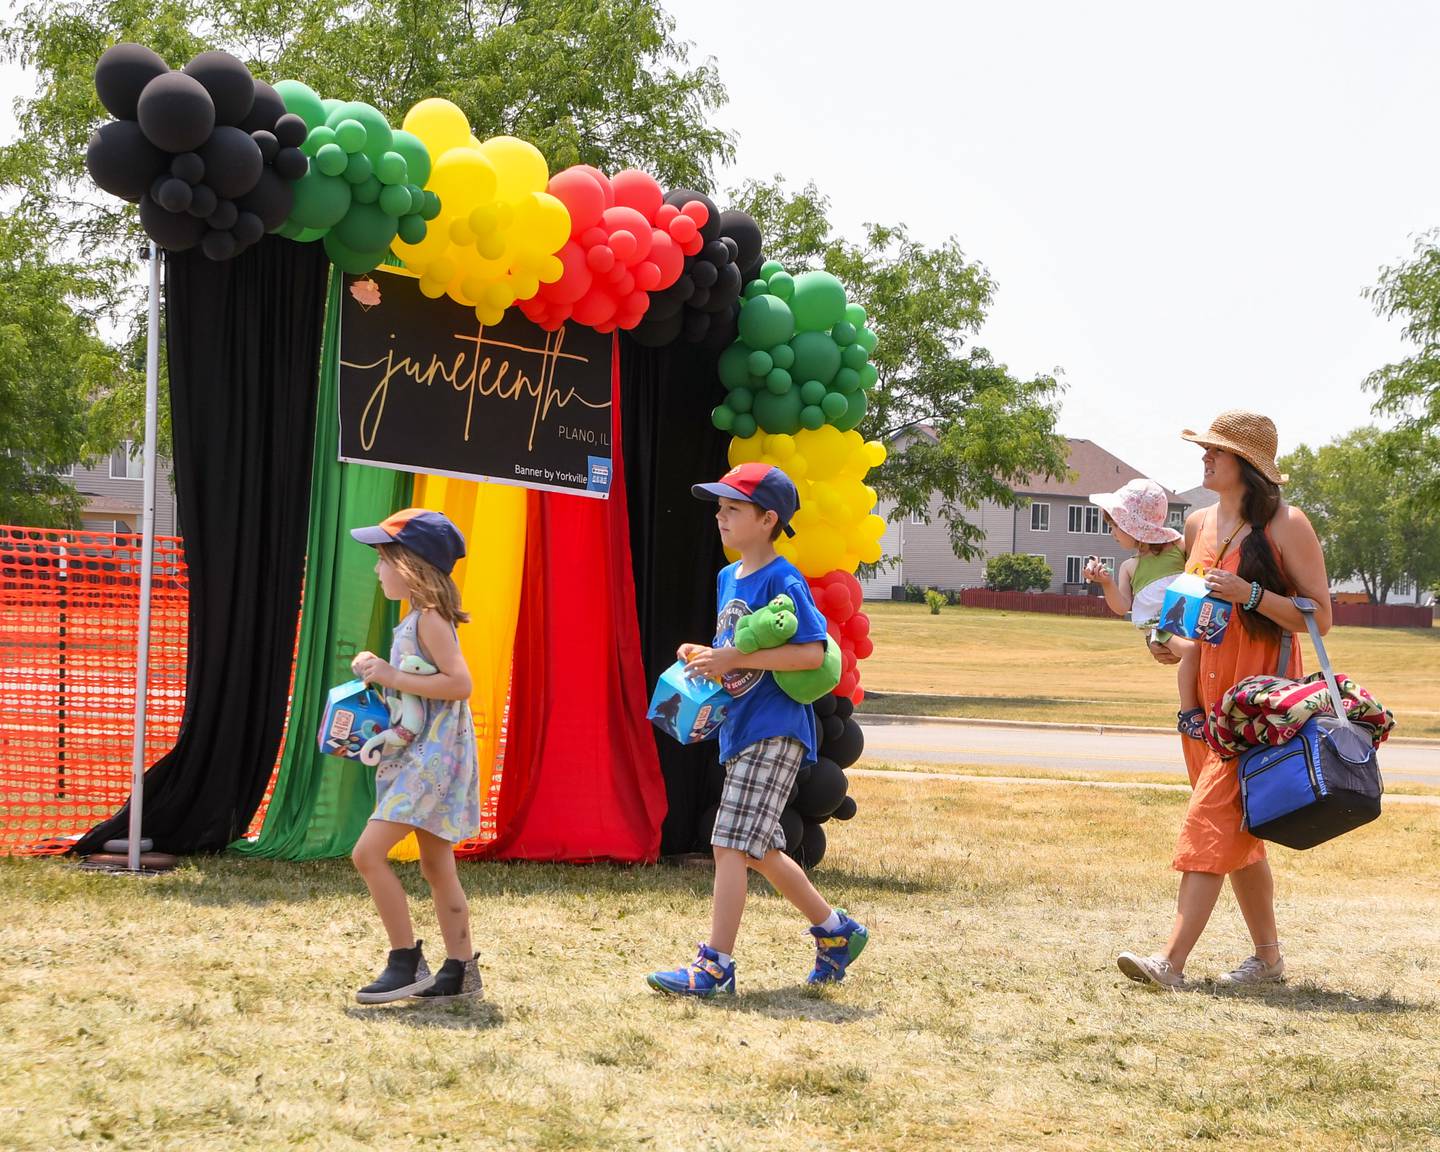 Family members Sofia, 5 years old, Silas, 8 years old along with Sayla, 2 years old, and mom Samantha Wood walk enter the festivities ground of the Juneteenth celebration held at Emily G. Johns school in Plano on Saturday June 17, 2023.